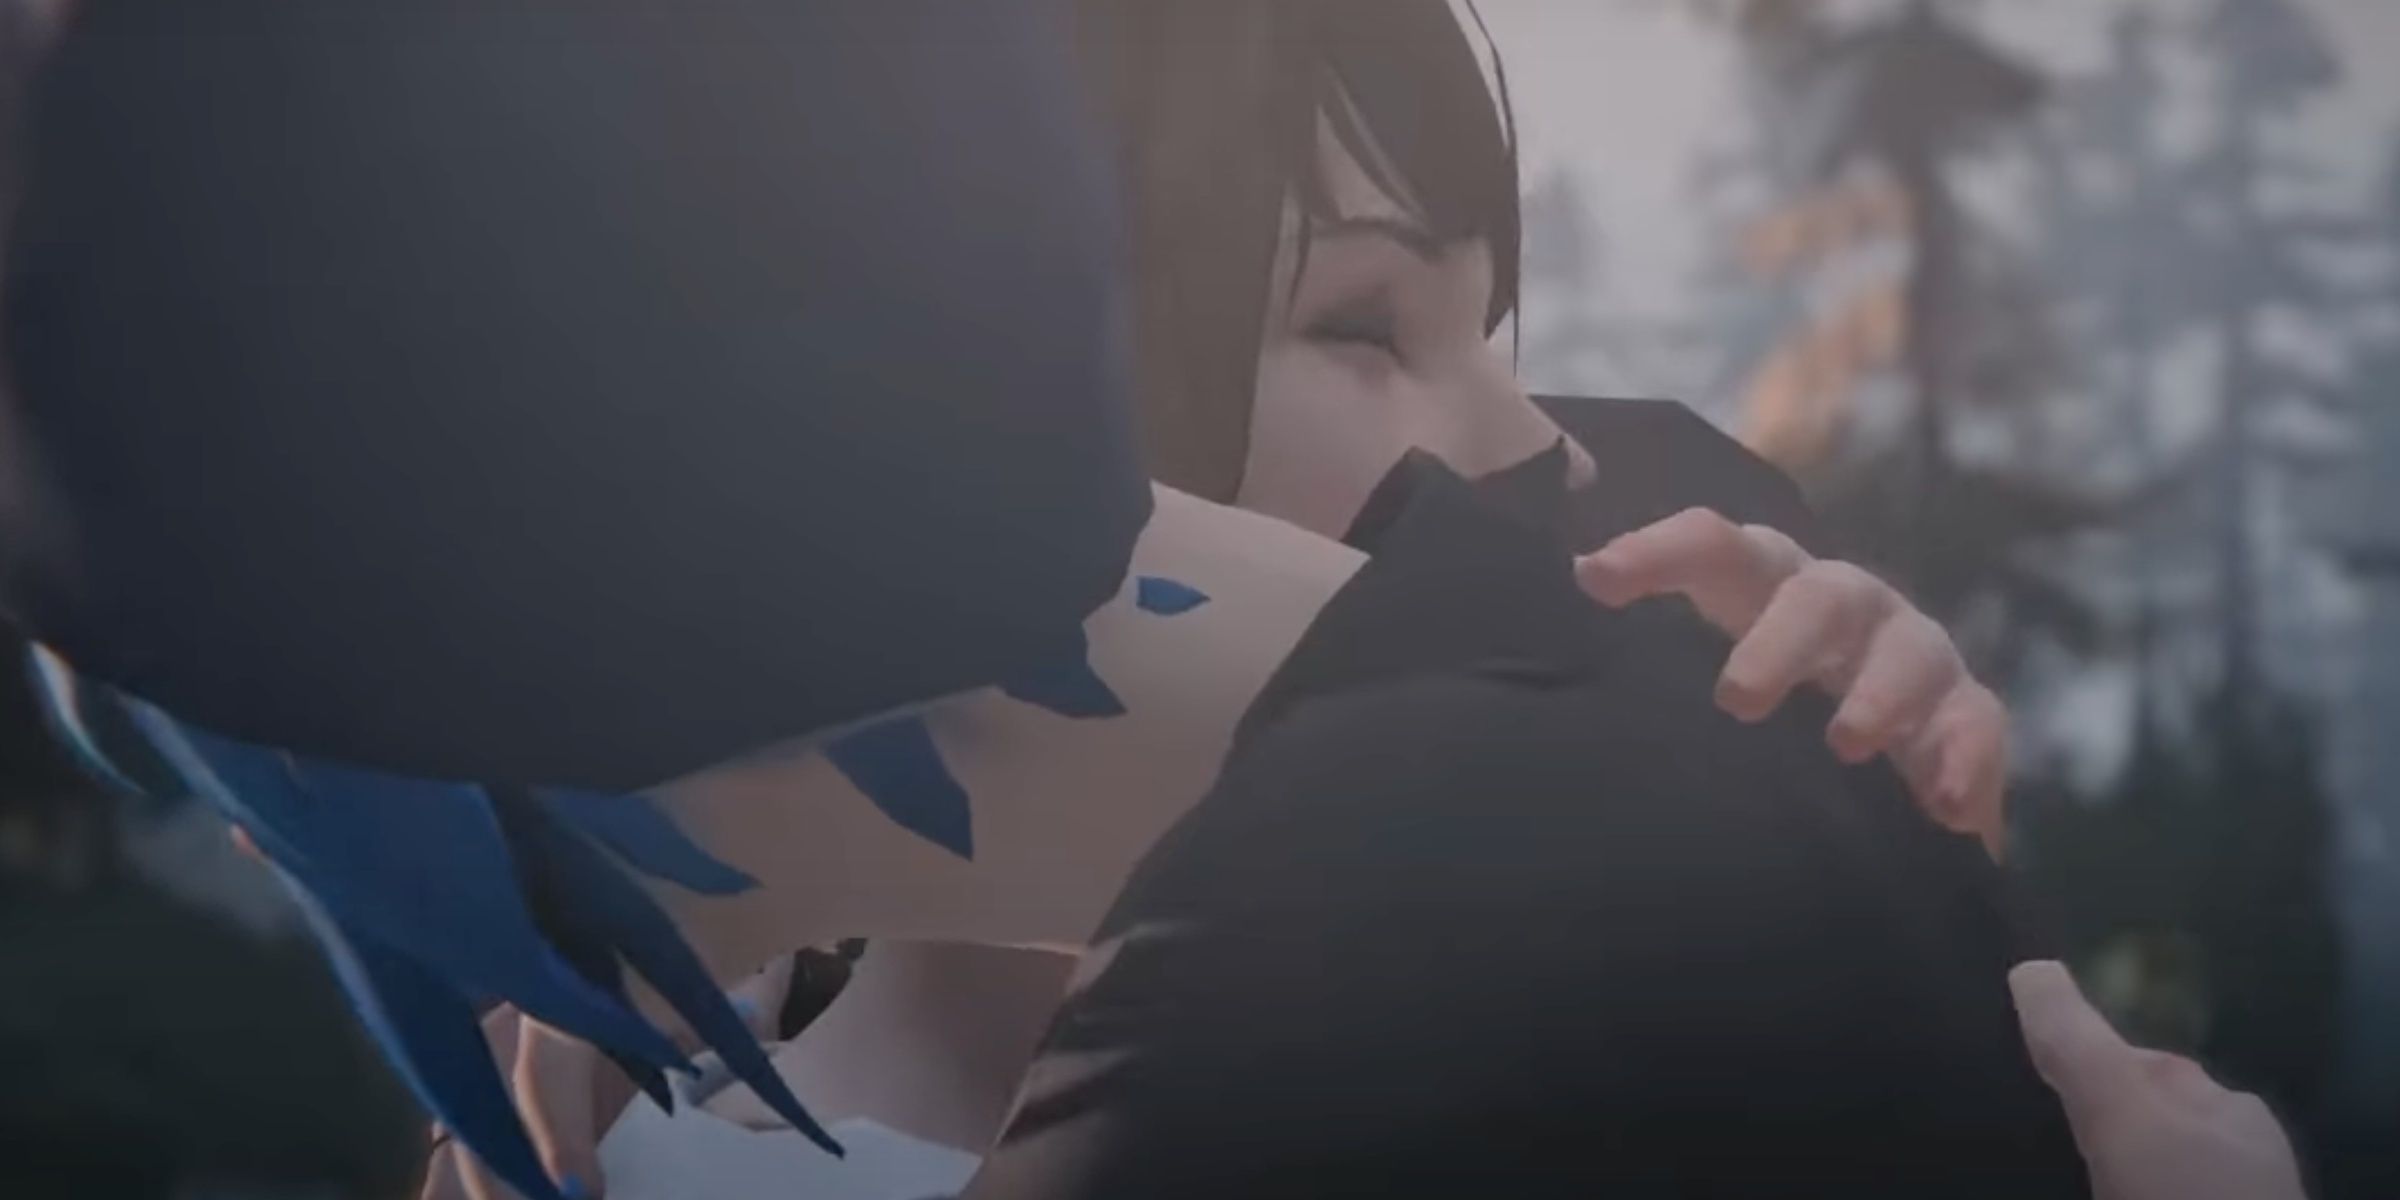 Life Is Strange Most Heartwarming Moments: Max Saves Chloe from the train.